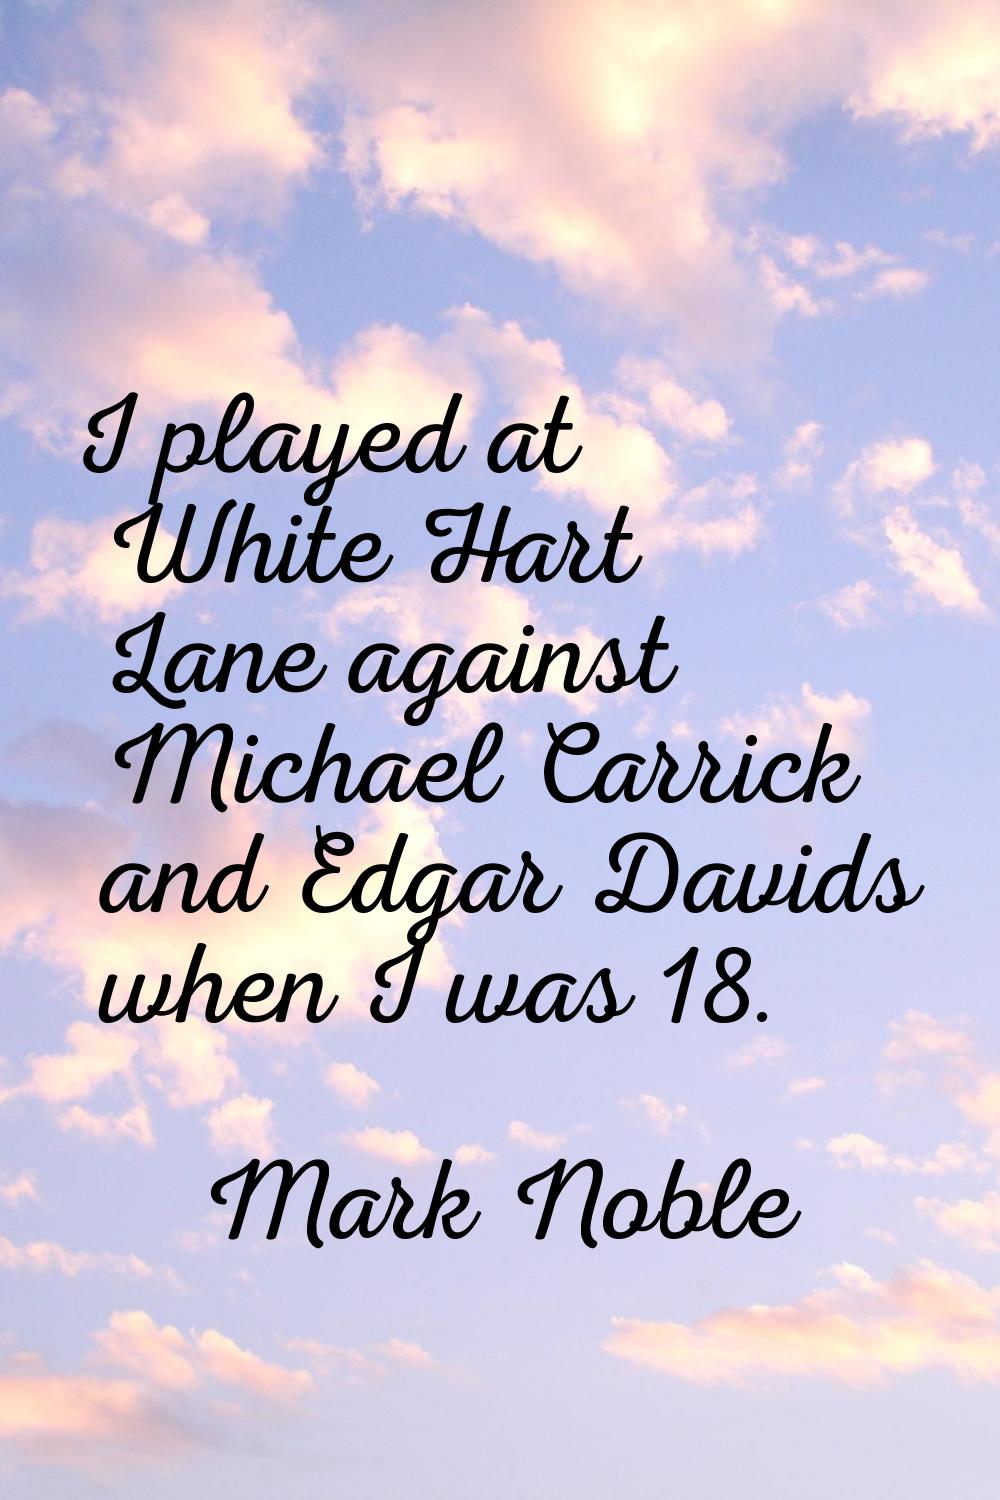 I played at White Hart Lane against Michael Carrick and Edgar Davids when I was 18.